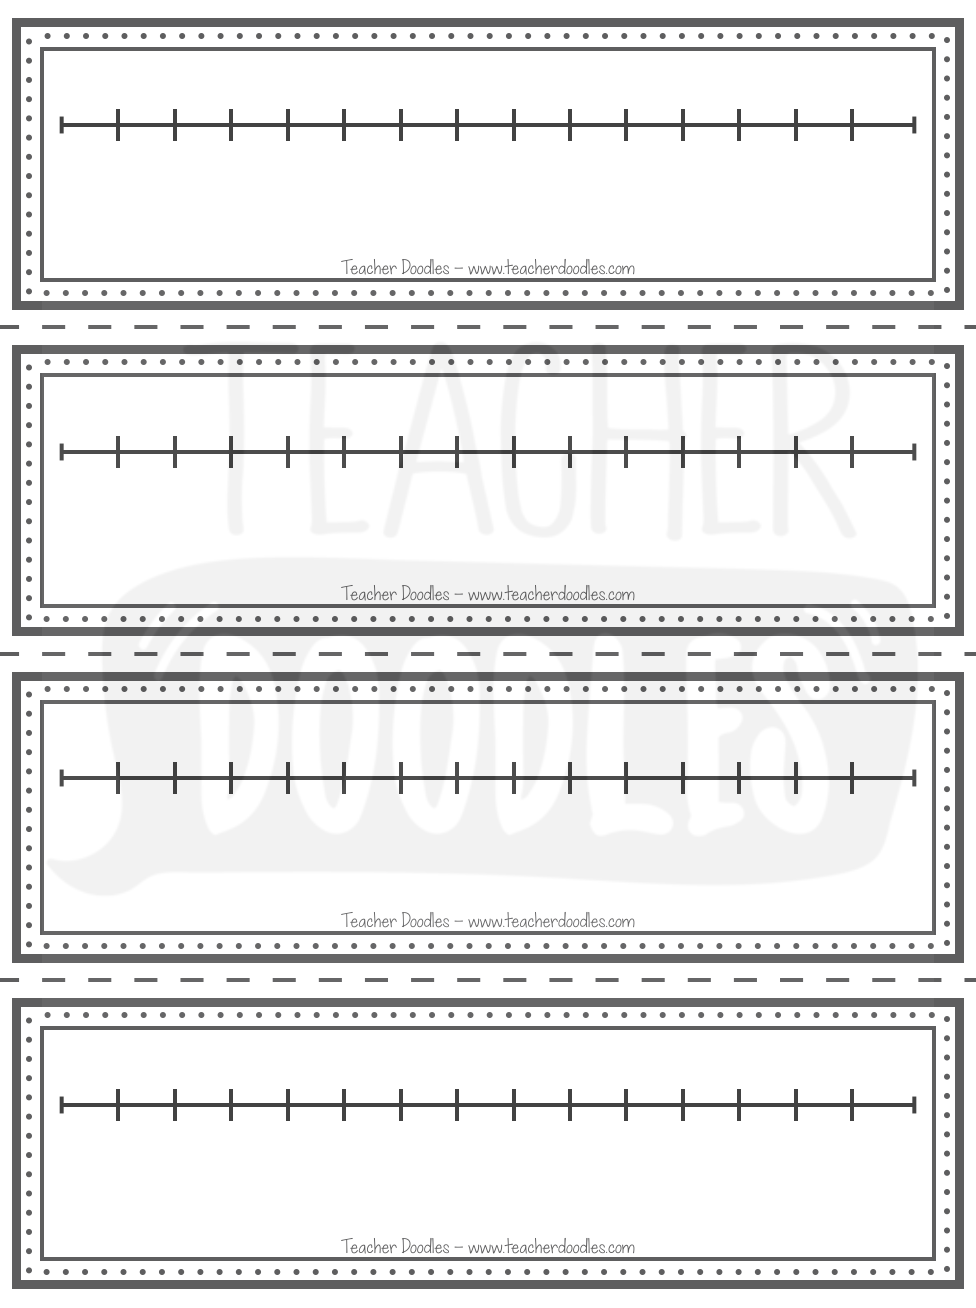 place-value-2-digit-numbers-worksheets-for-grade-1-kidpid